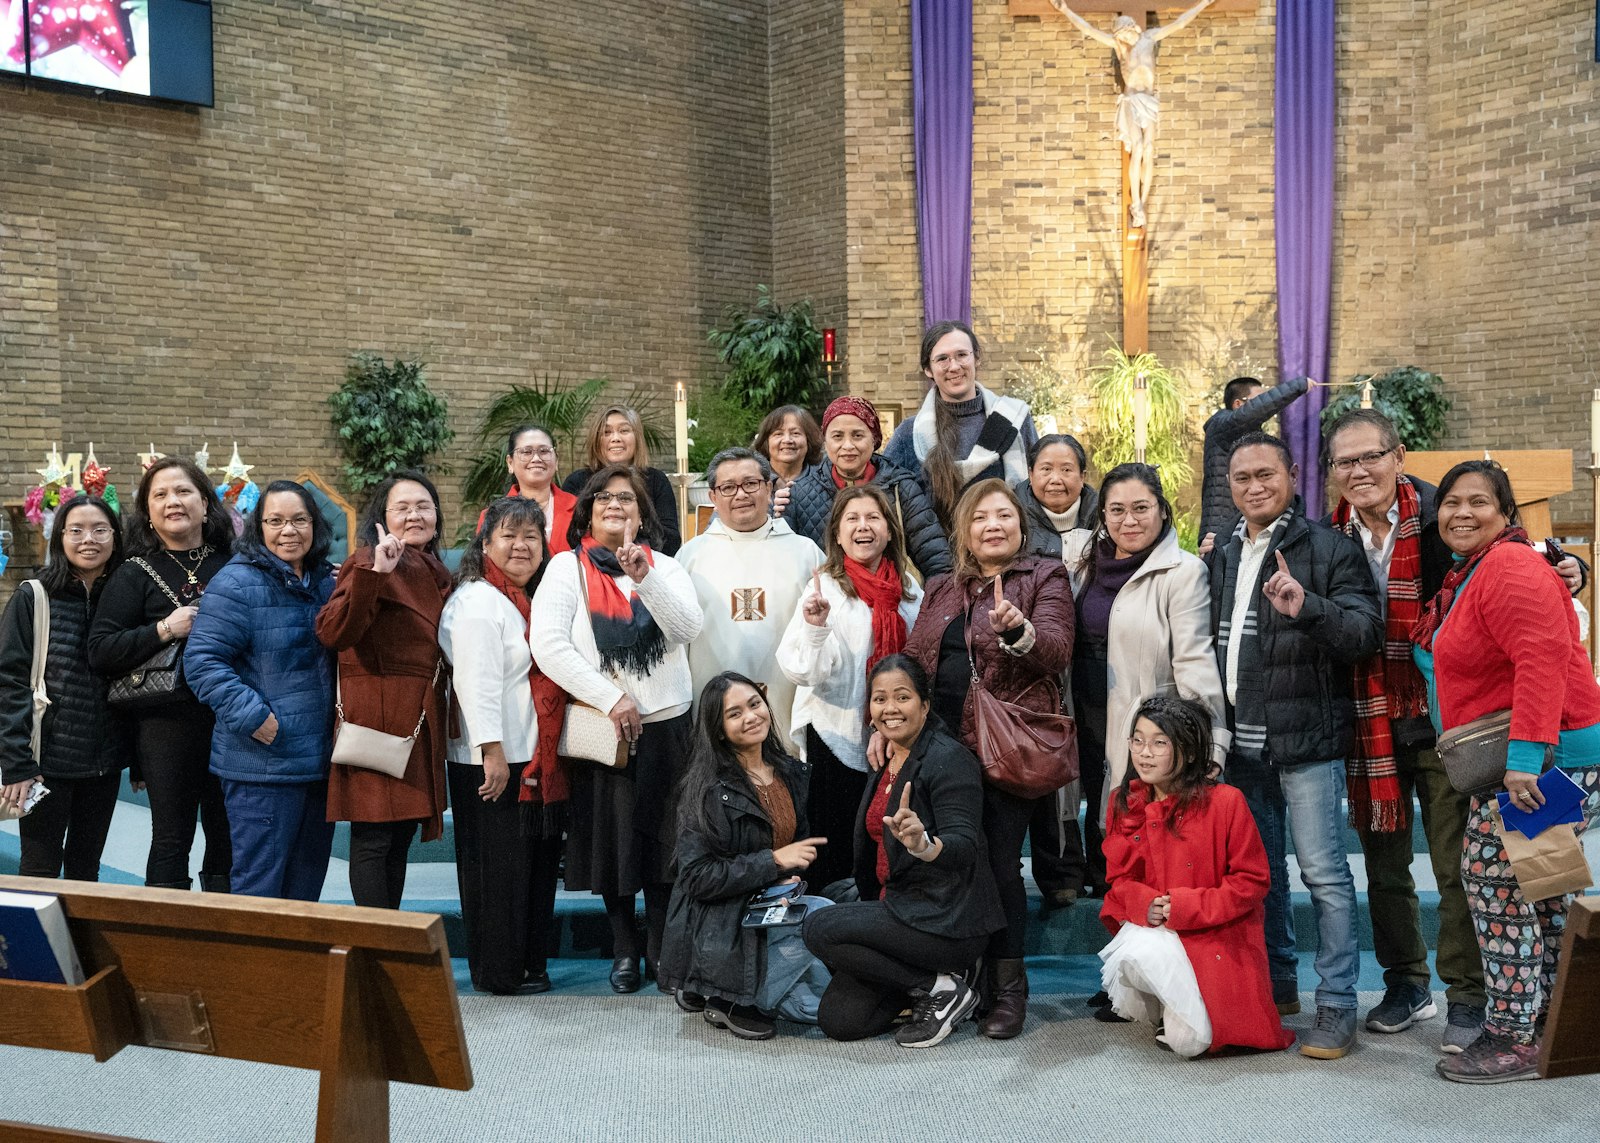 Members of the Filipino community at St. Mary, Cause of Our Joy Parish in Westland hold up the number one during the first night of Simbang Gabi, a nine-day celebration of Masses in anticipation of Christmas, on Dec. 15 at St. Mary, Cause of Our Joy Parish in Westland.